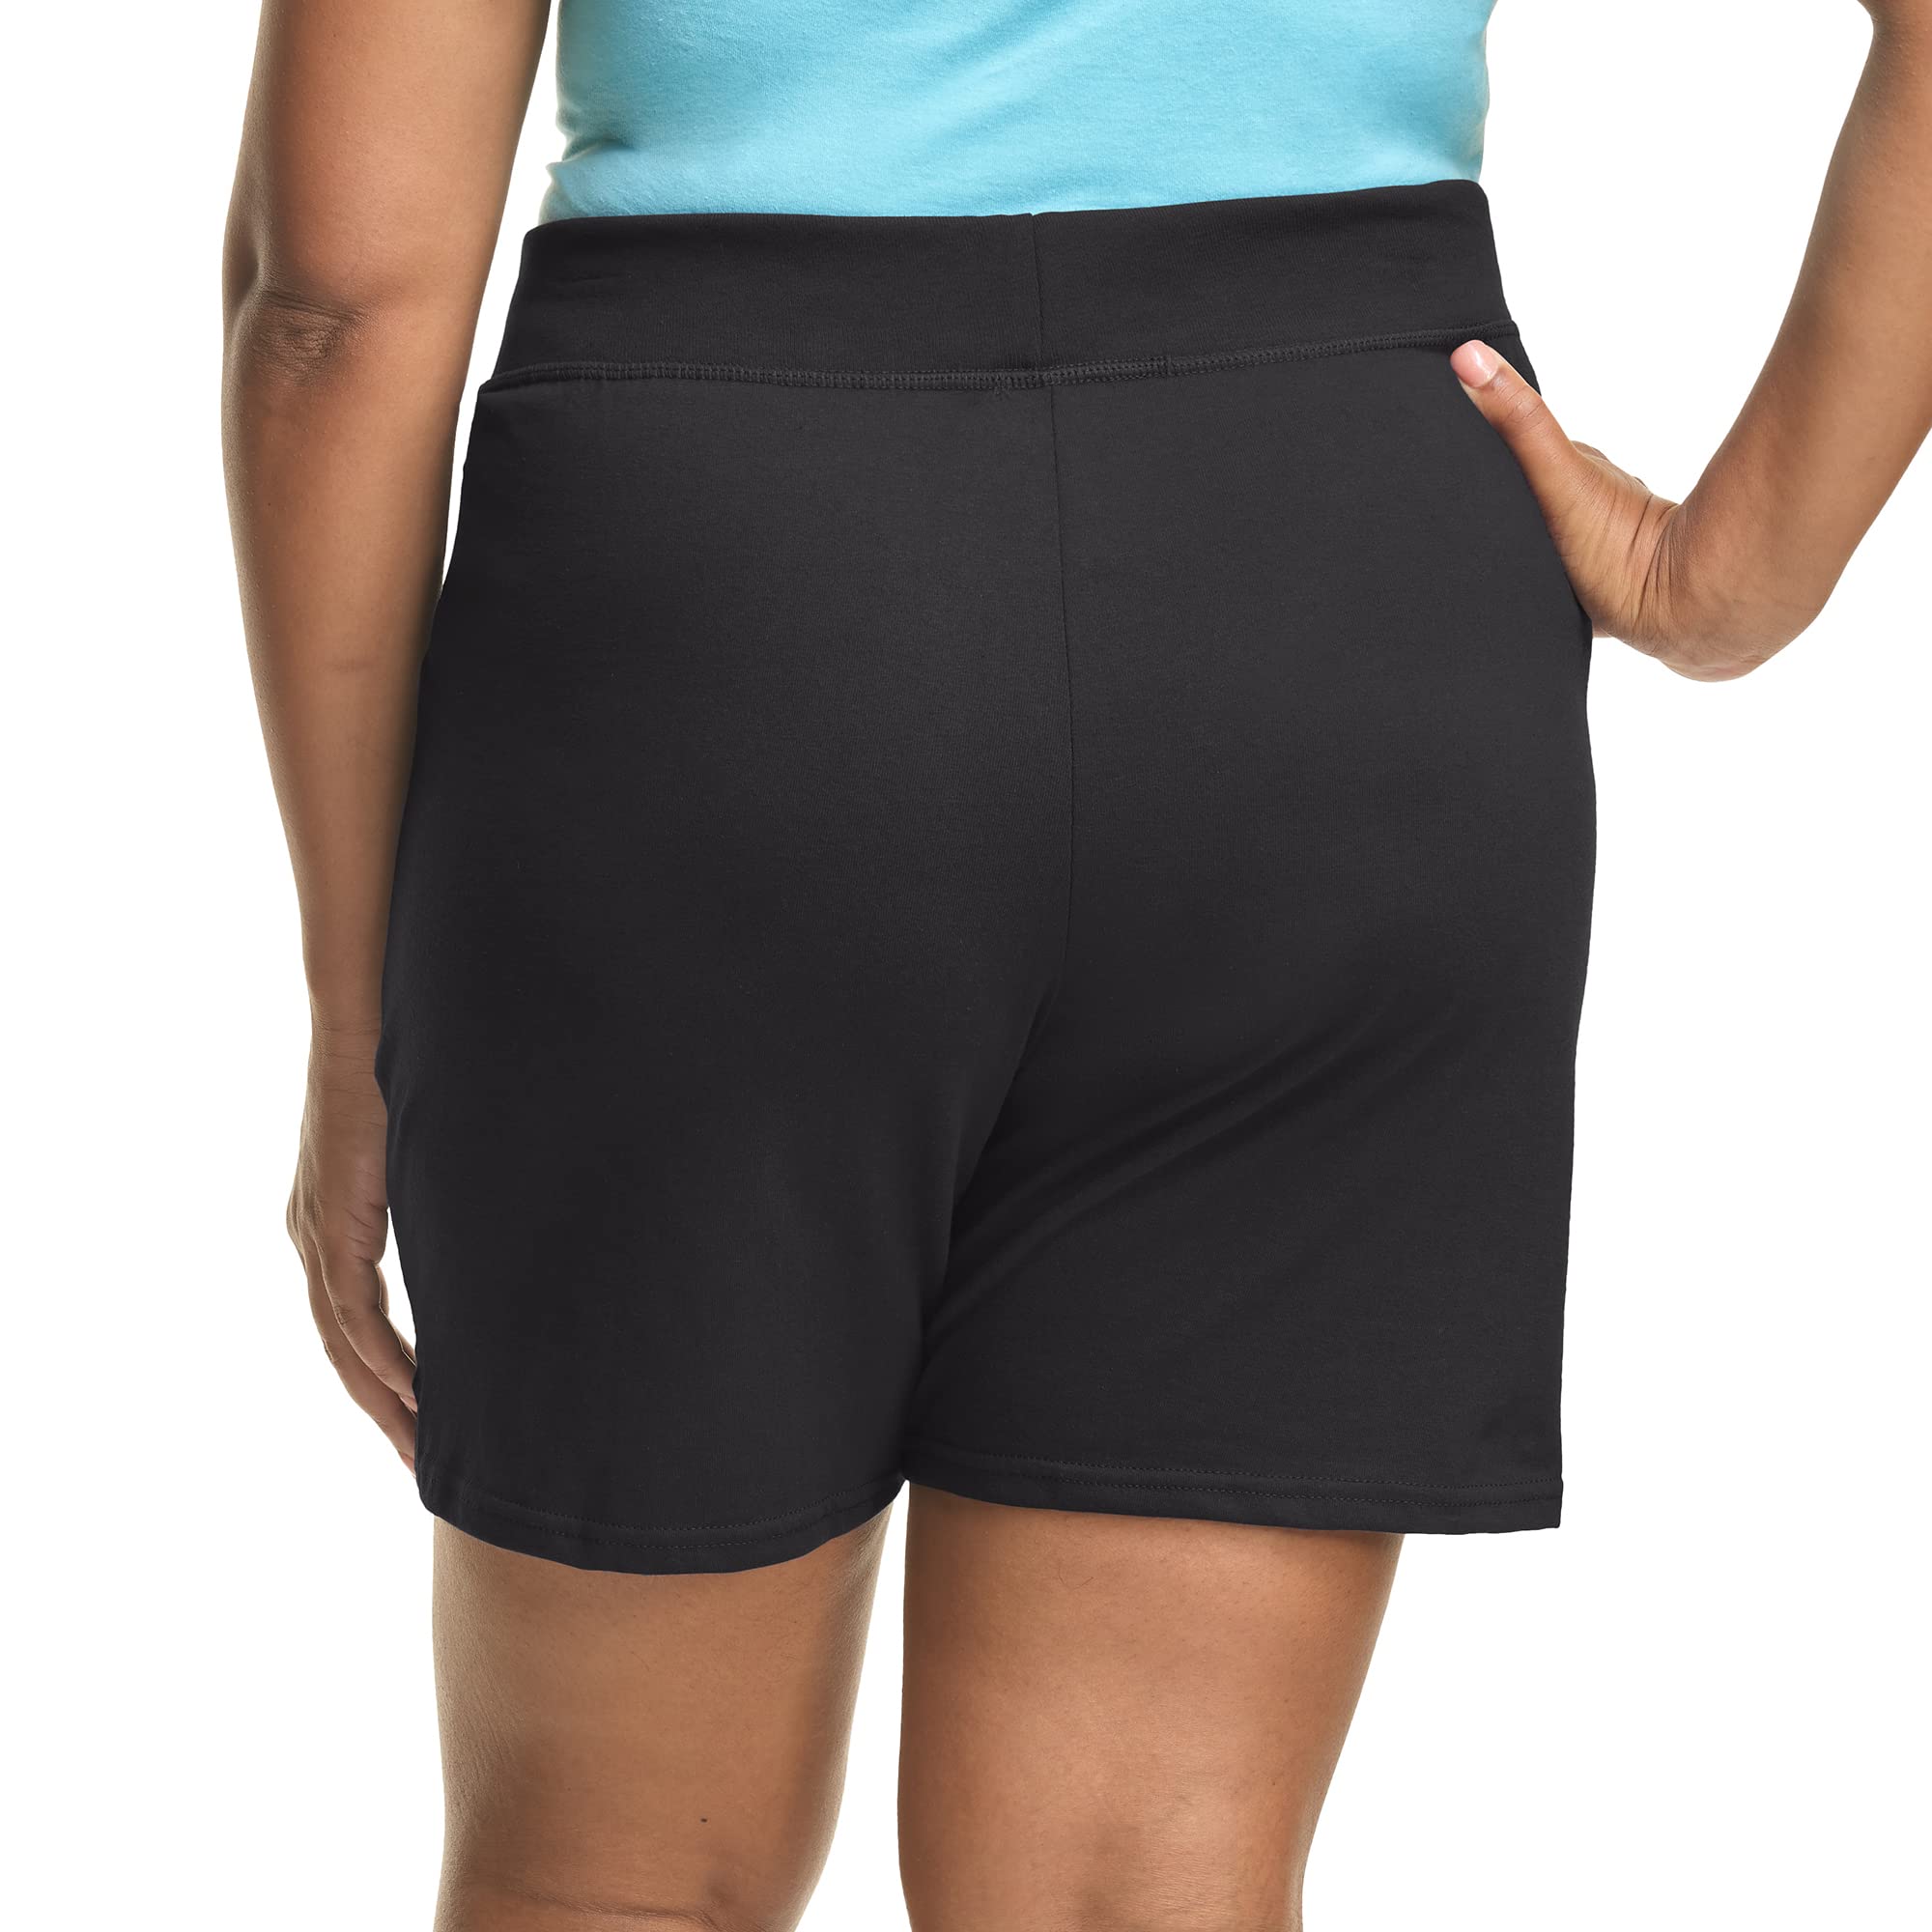 Just My Size by Hanes Cotton Jersey Shorts, Women’s Cotton Shorts, Women’s Tagless Shorts, 7